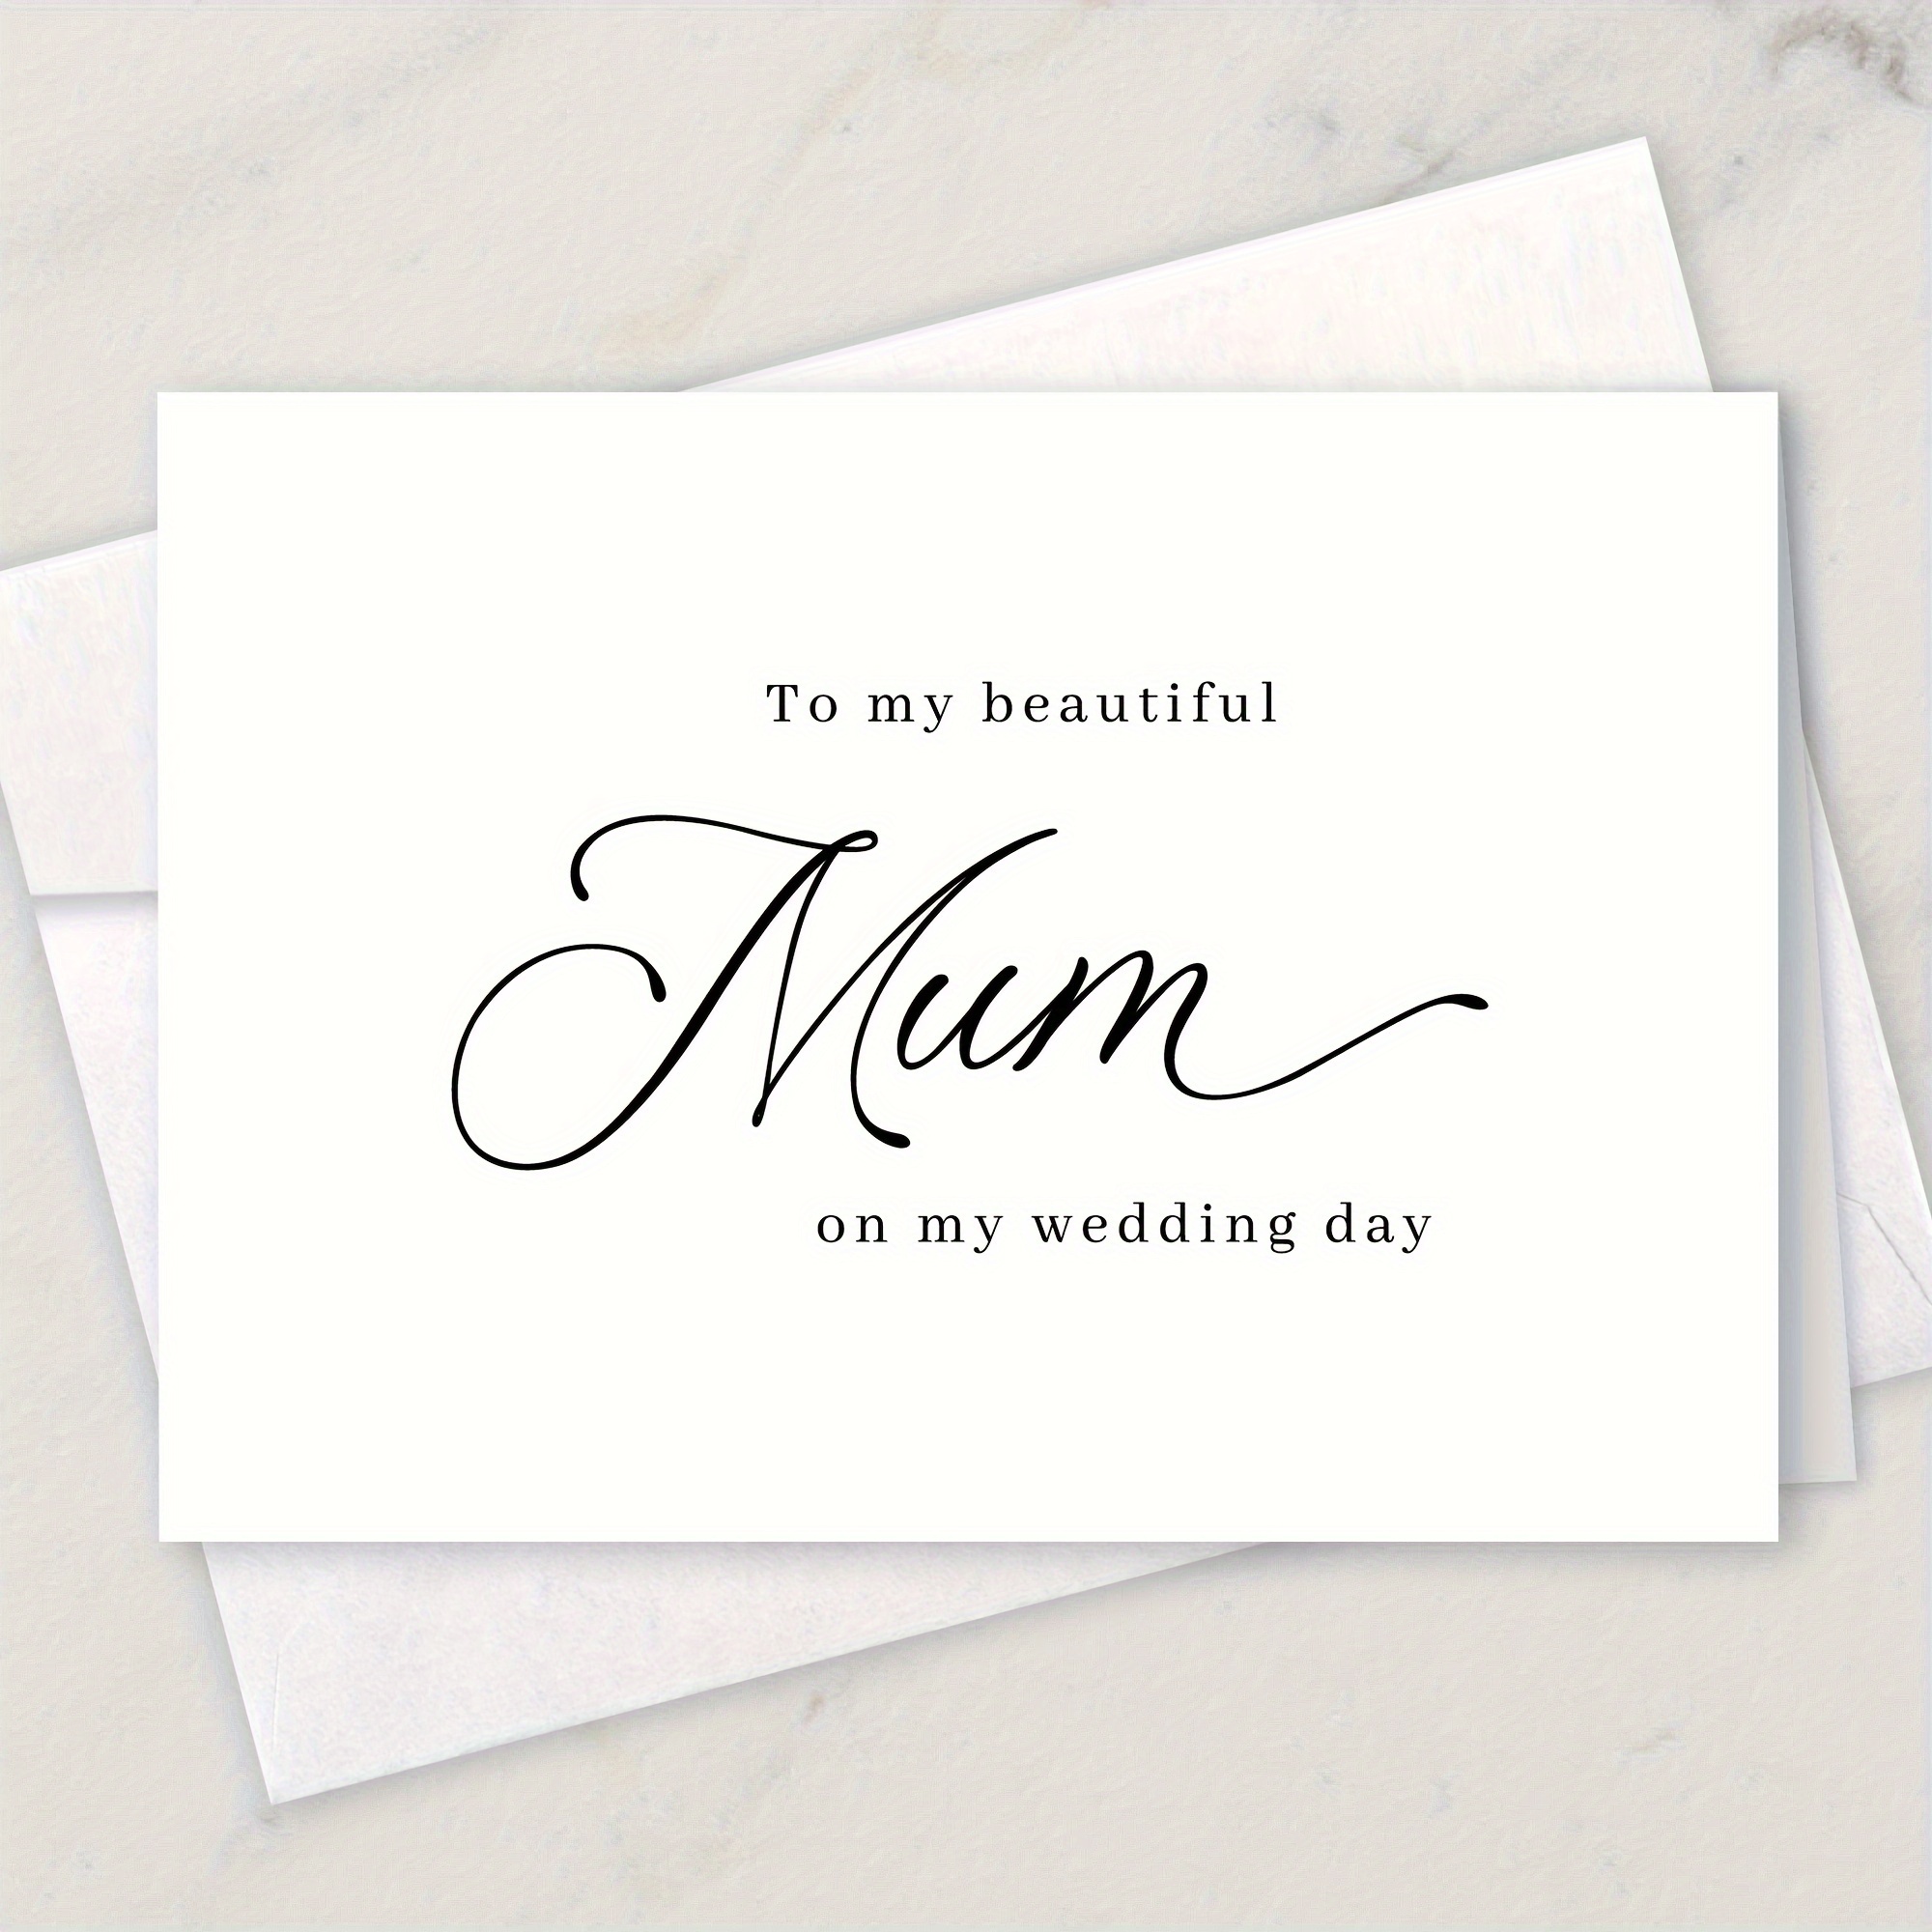 

Wedding Day Greeting Card For Mum - Elegant English Language Card For Mother On Your Special Day - Includes Envelope